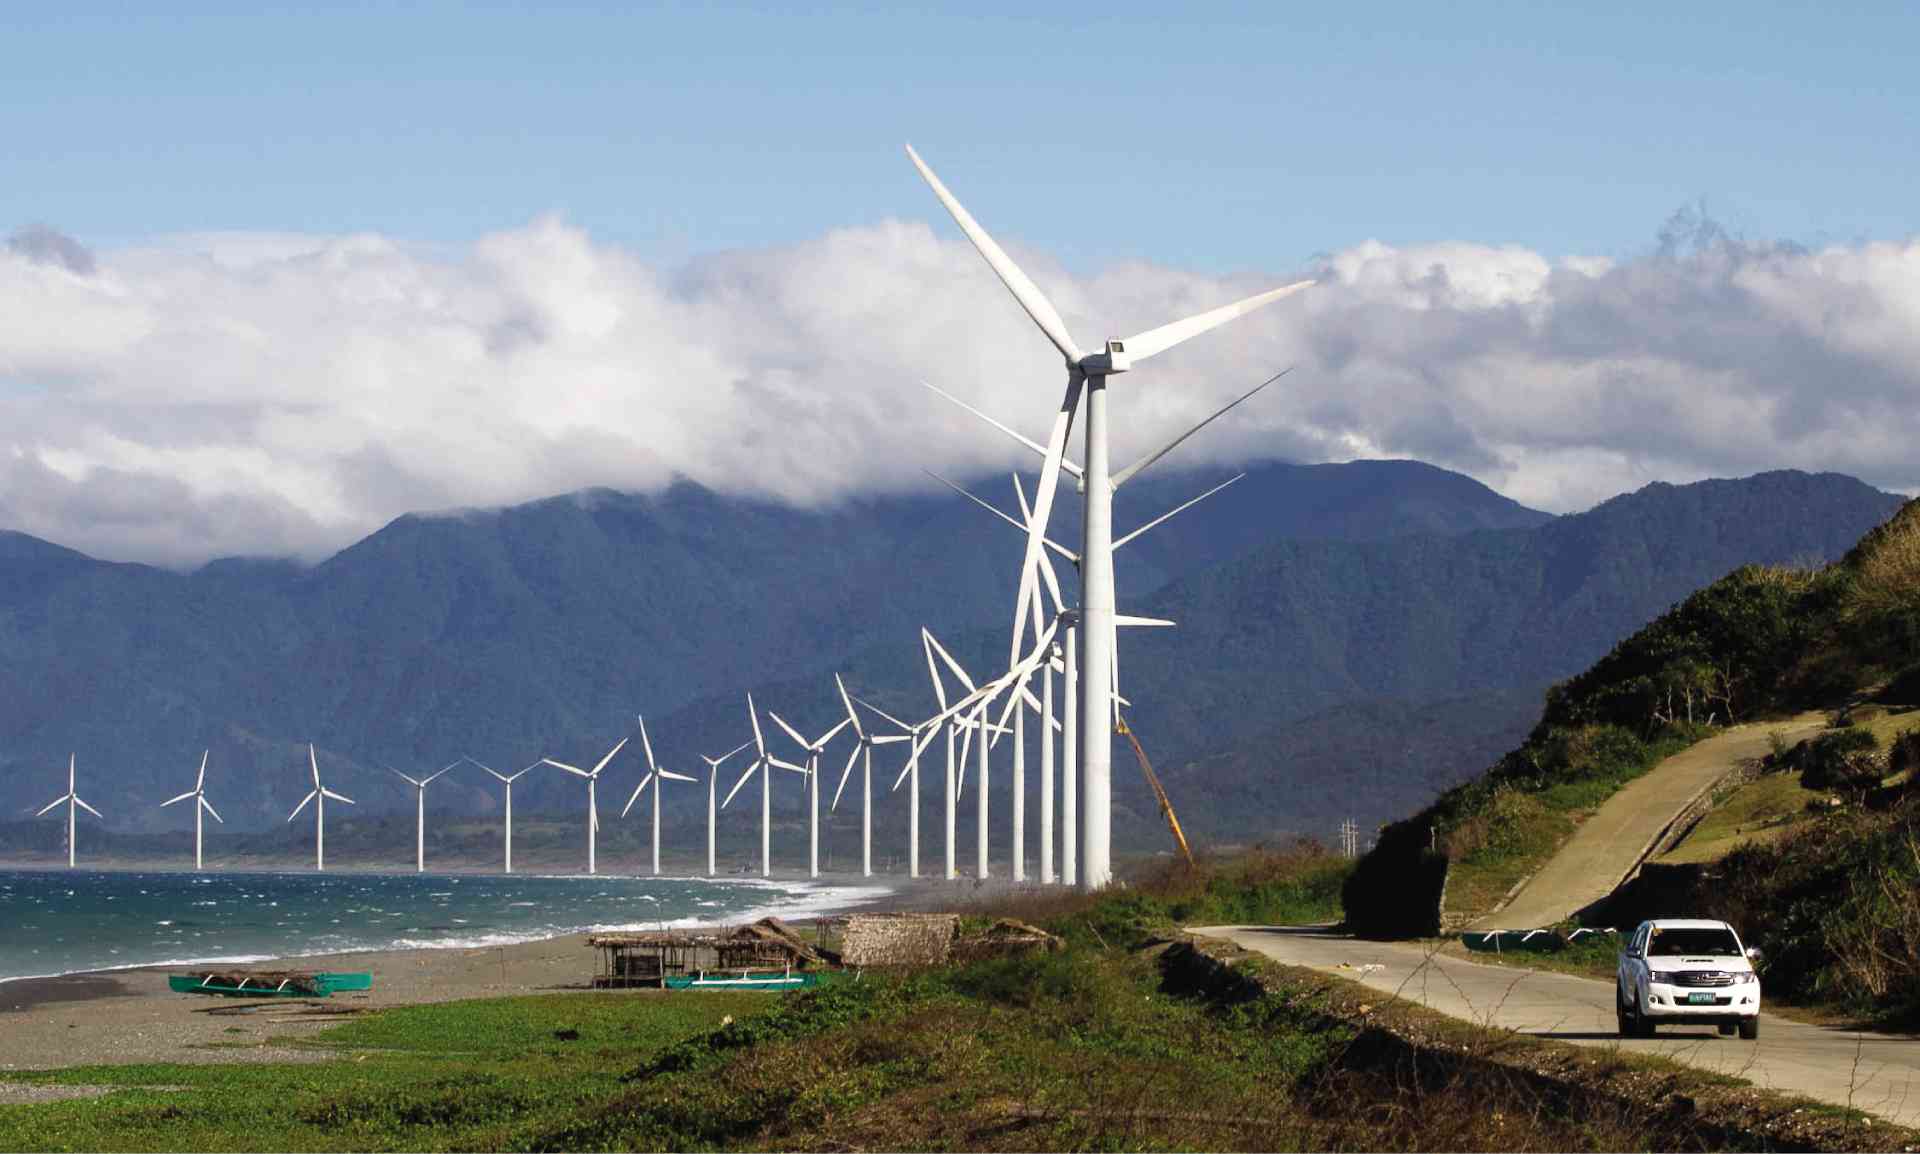 Bongbong Marcos is claiming the Bangui Windmills project as his own and so environmental groups are now reminding him about his campaign promise to make the Philippines switch to renewable energy sources